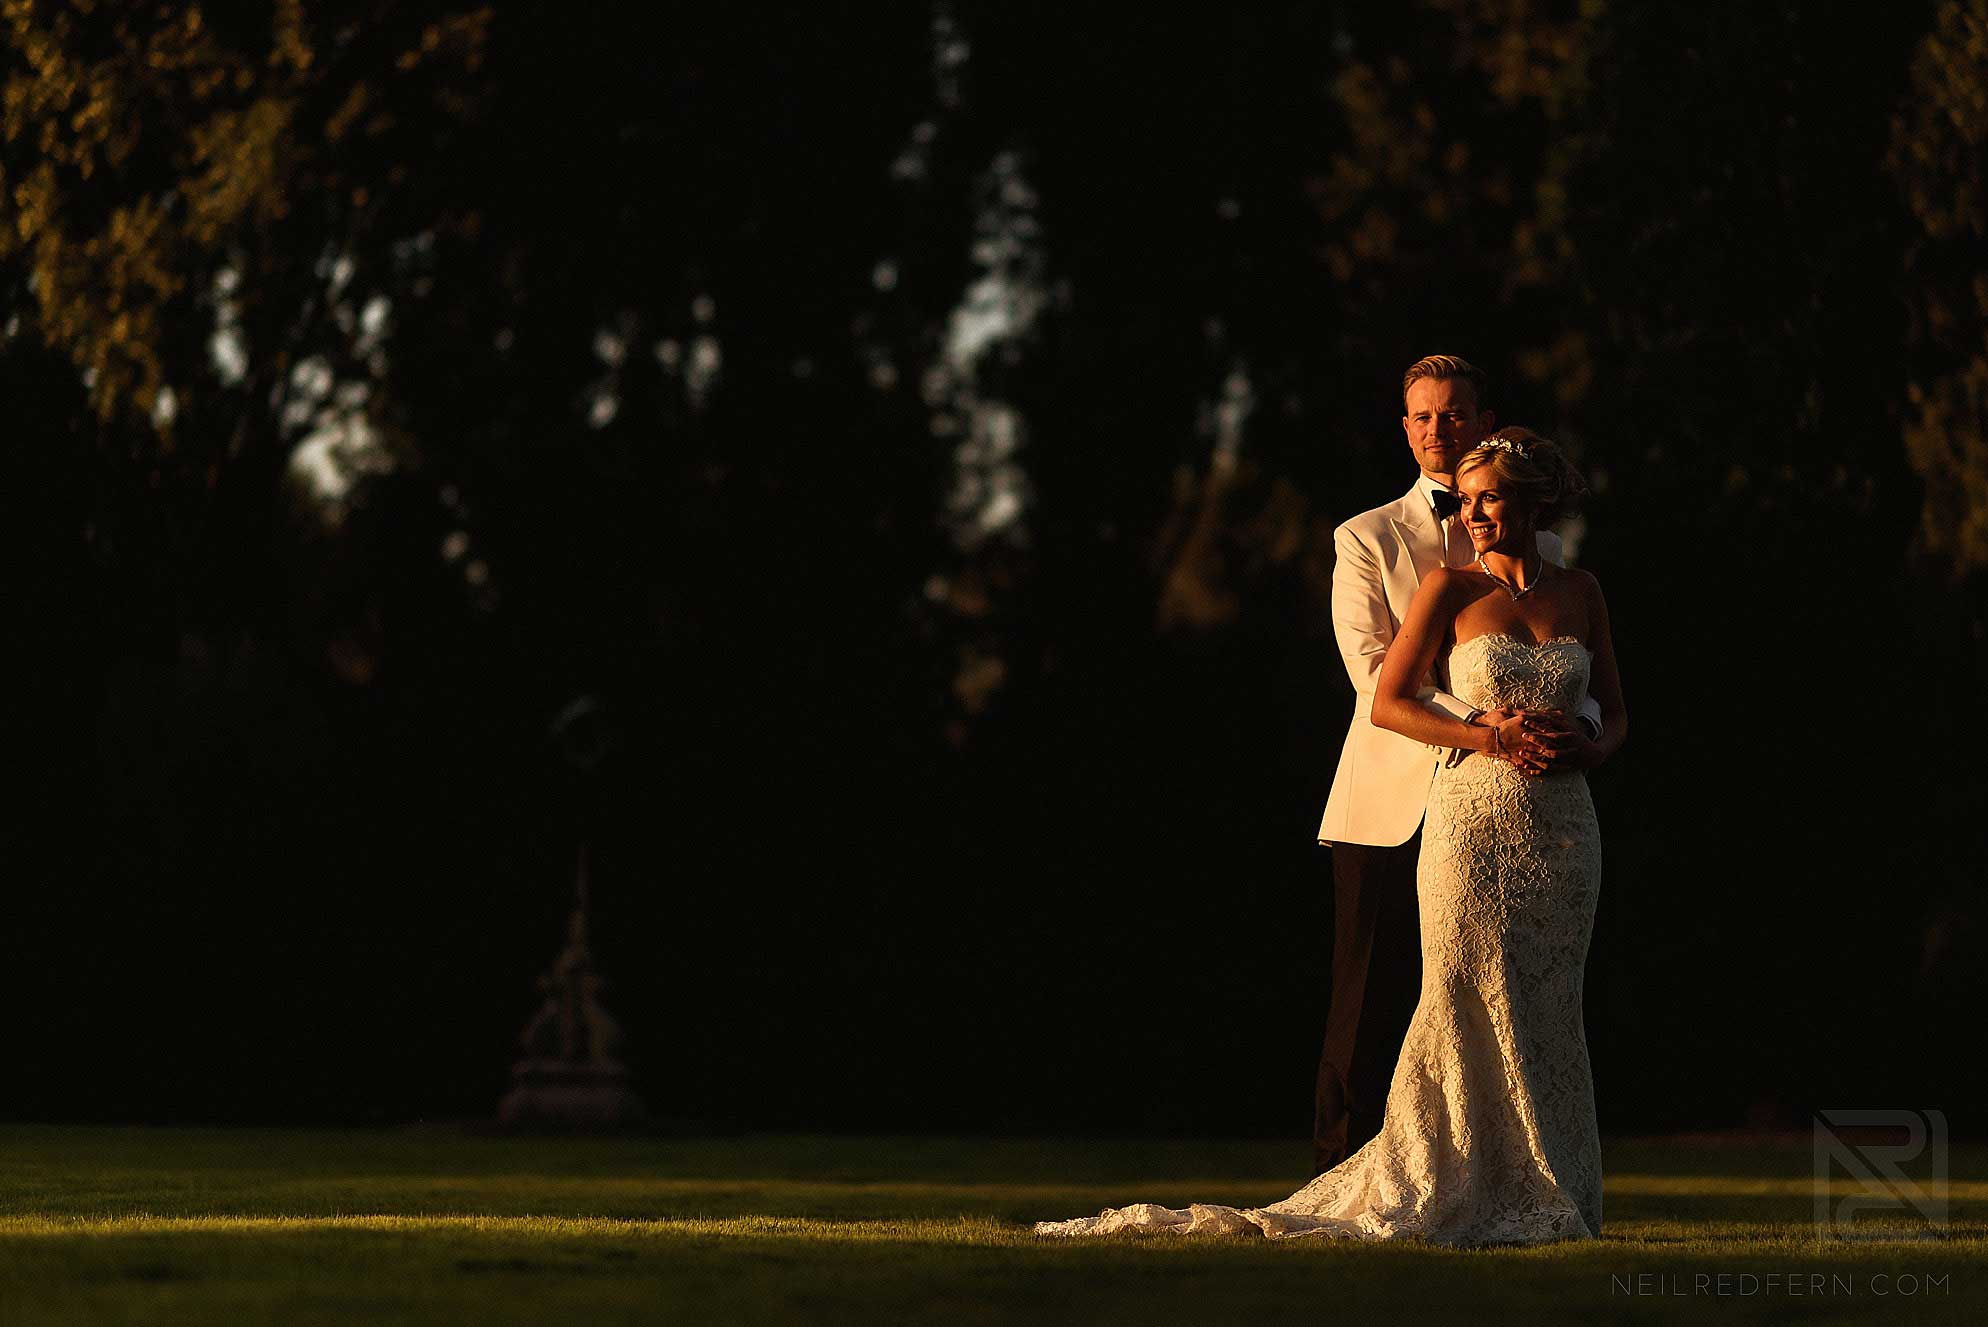 sunset portrait of bride and groom